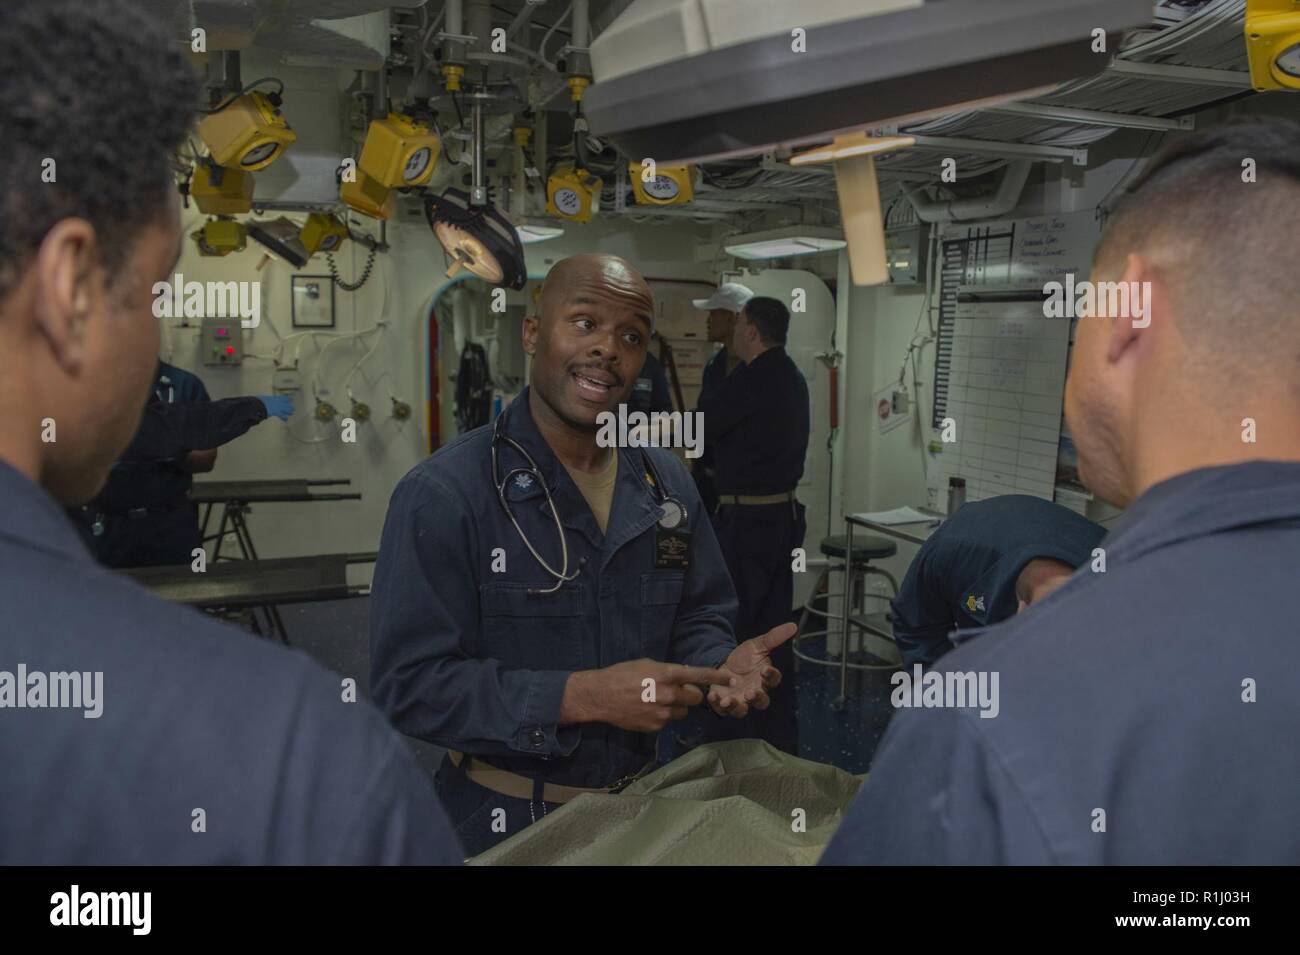 PACIFIC OCEAN (Sept. 21, 2018) Cmdr. Garfield Cross IV, from Annandale, Va., discusses triage procedures with Hospitalman Emmanuel Flores, left, from Chicago, and Hospital Corpsman 2nd Class Nathaniel Garrett, from St. Louis, during a mass casualty drill in the medical triage room of the amphibious assault ship USS Bonhomme Richard (LHD 6). Bonhomme Richard is currently underway in the U.S. 3rd Fleet area of operations. Stock Photo